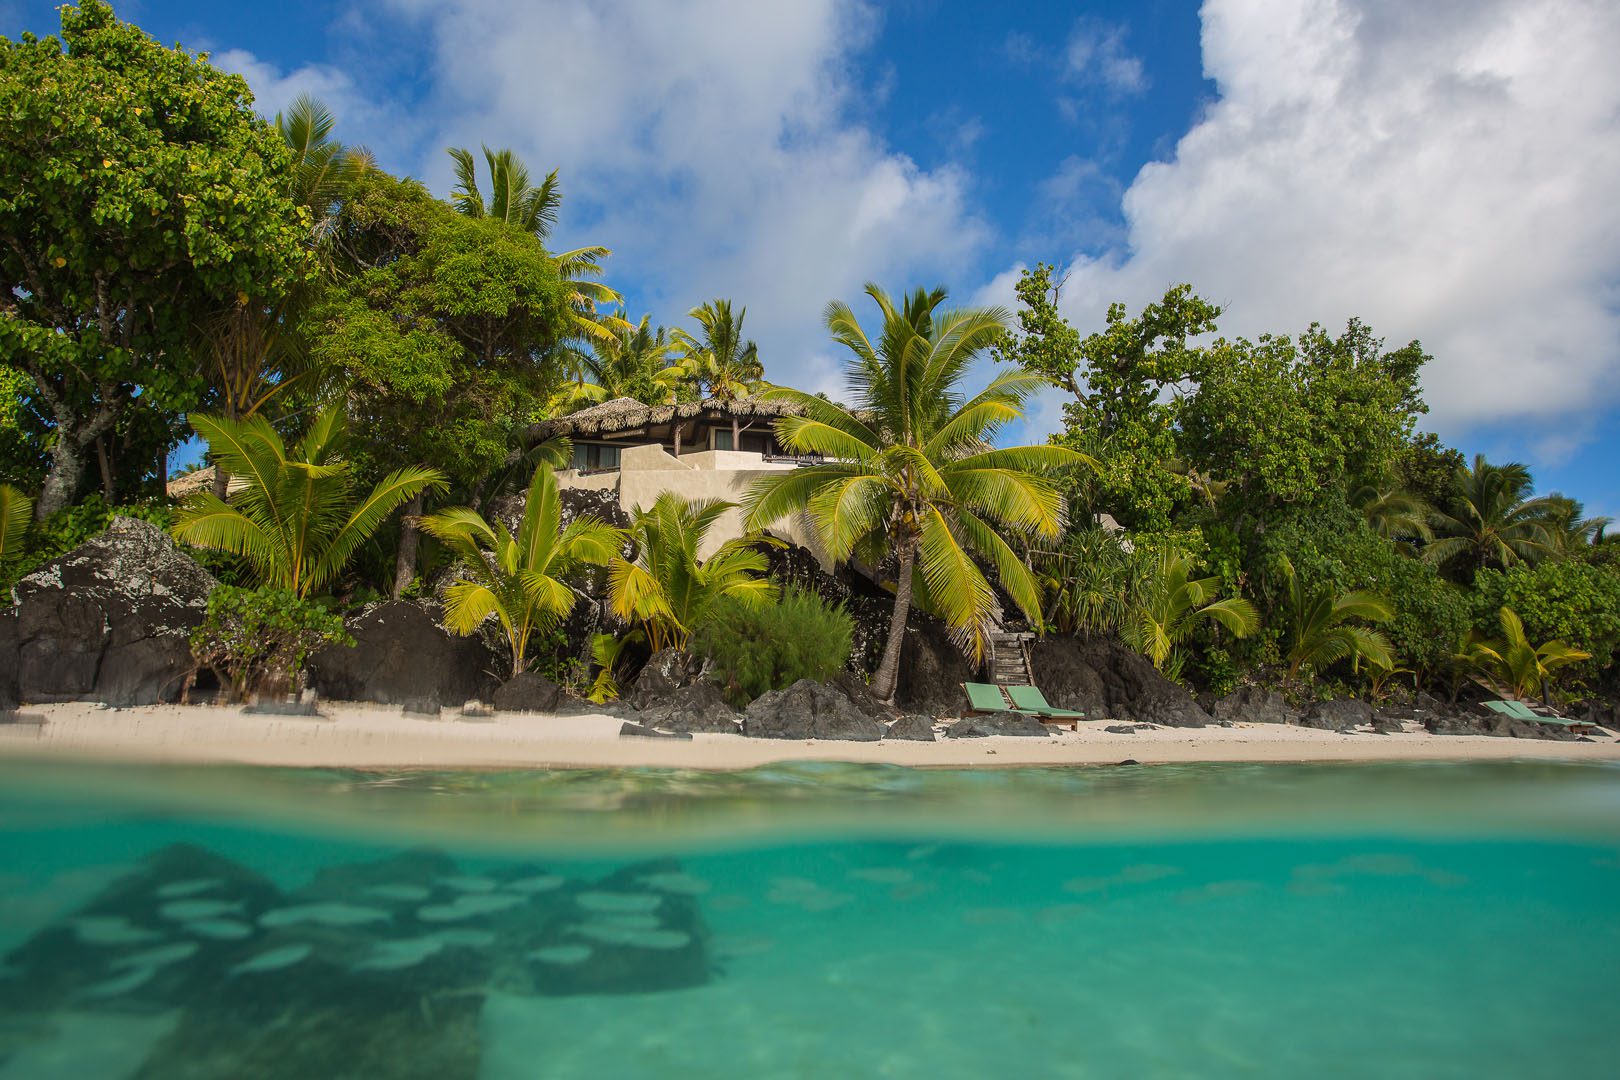 View of the Ultimate Beachfront Villa and lush tropical gardens, overlooking the blue lagoon